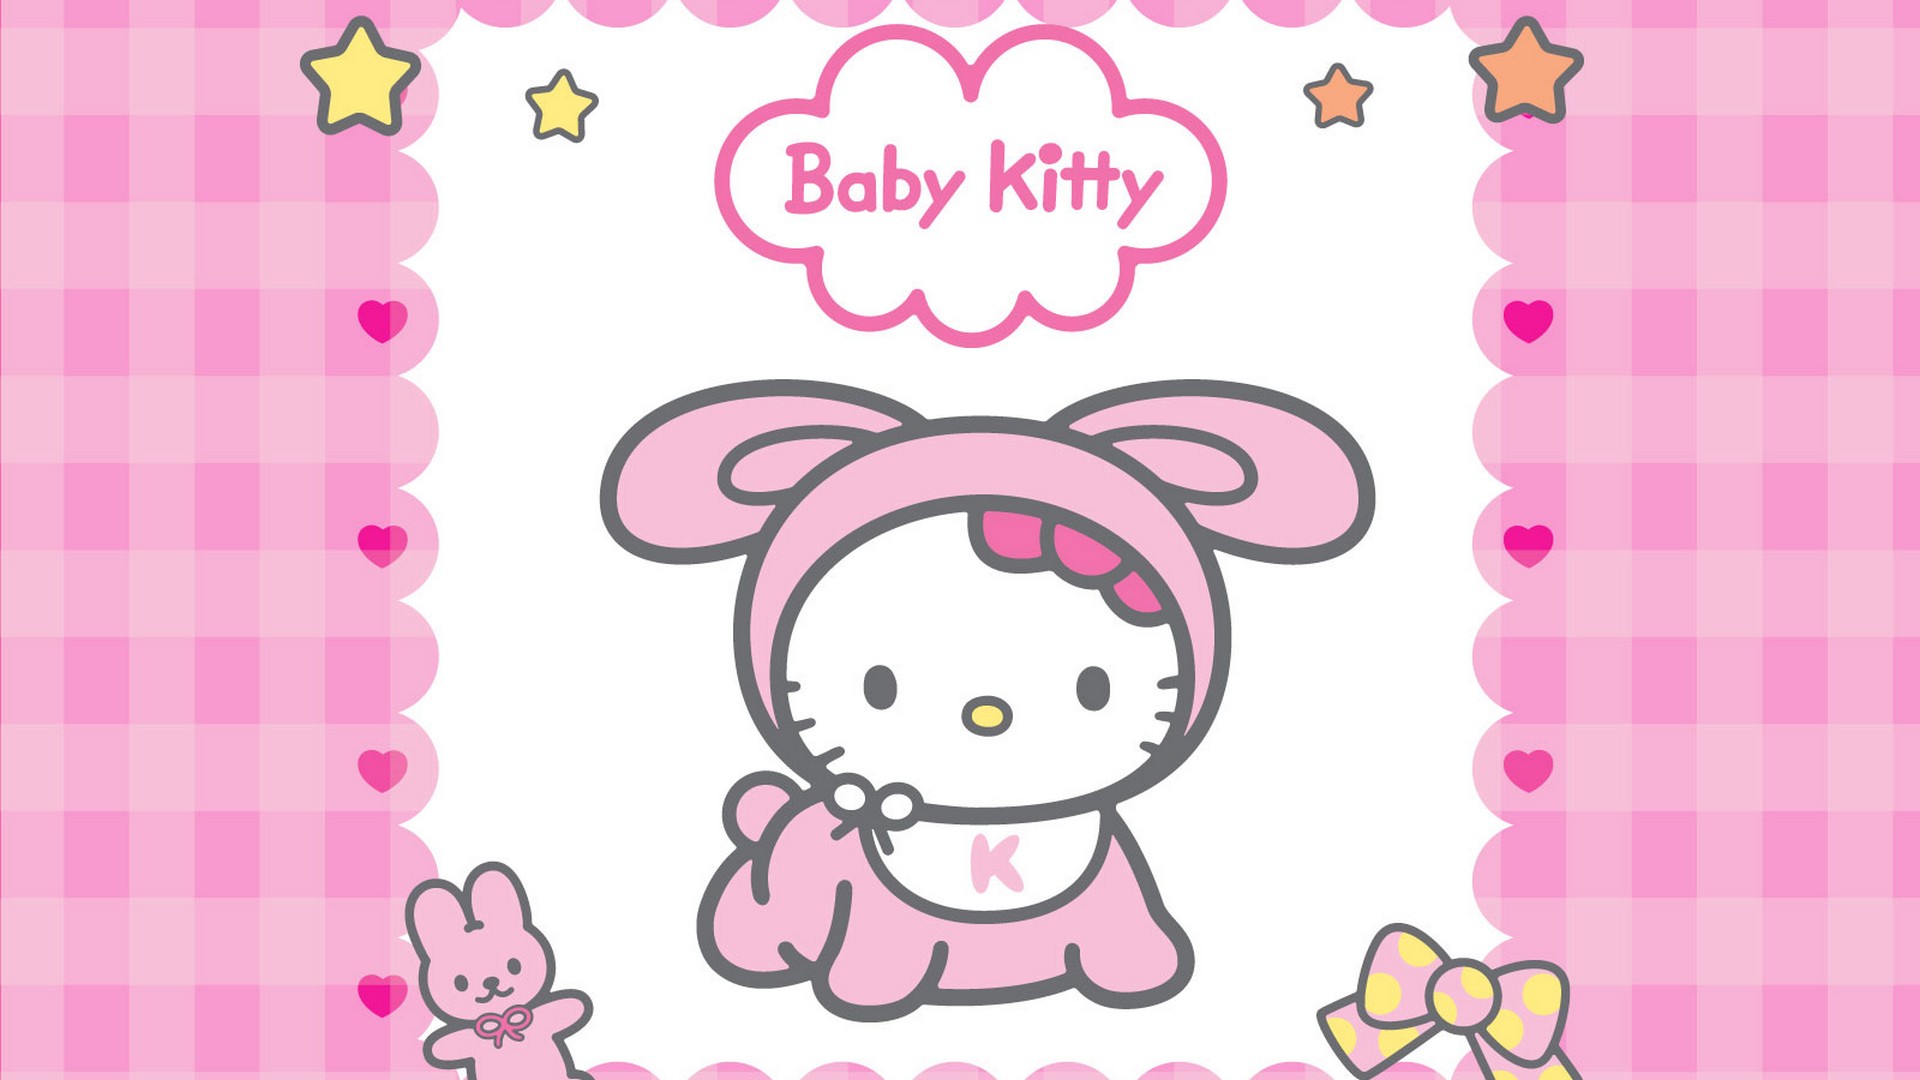 Hello Kitty Background Wallpaper HD With Resolution 1920X1080 pixel. You can make this wallpaper for your Desktop Computer Backgrounds, Mac Wallpapers, Android Lock screen or iPhone Screensavers